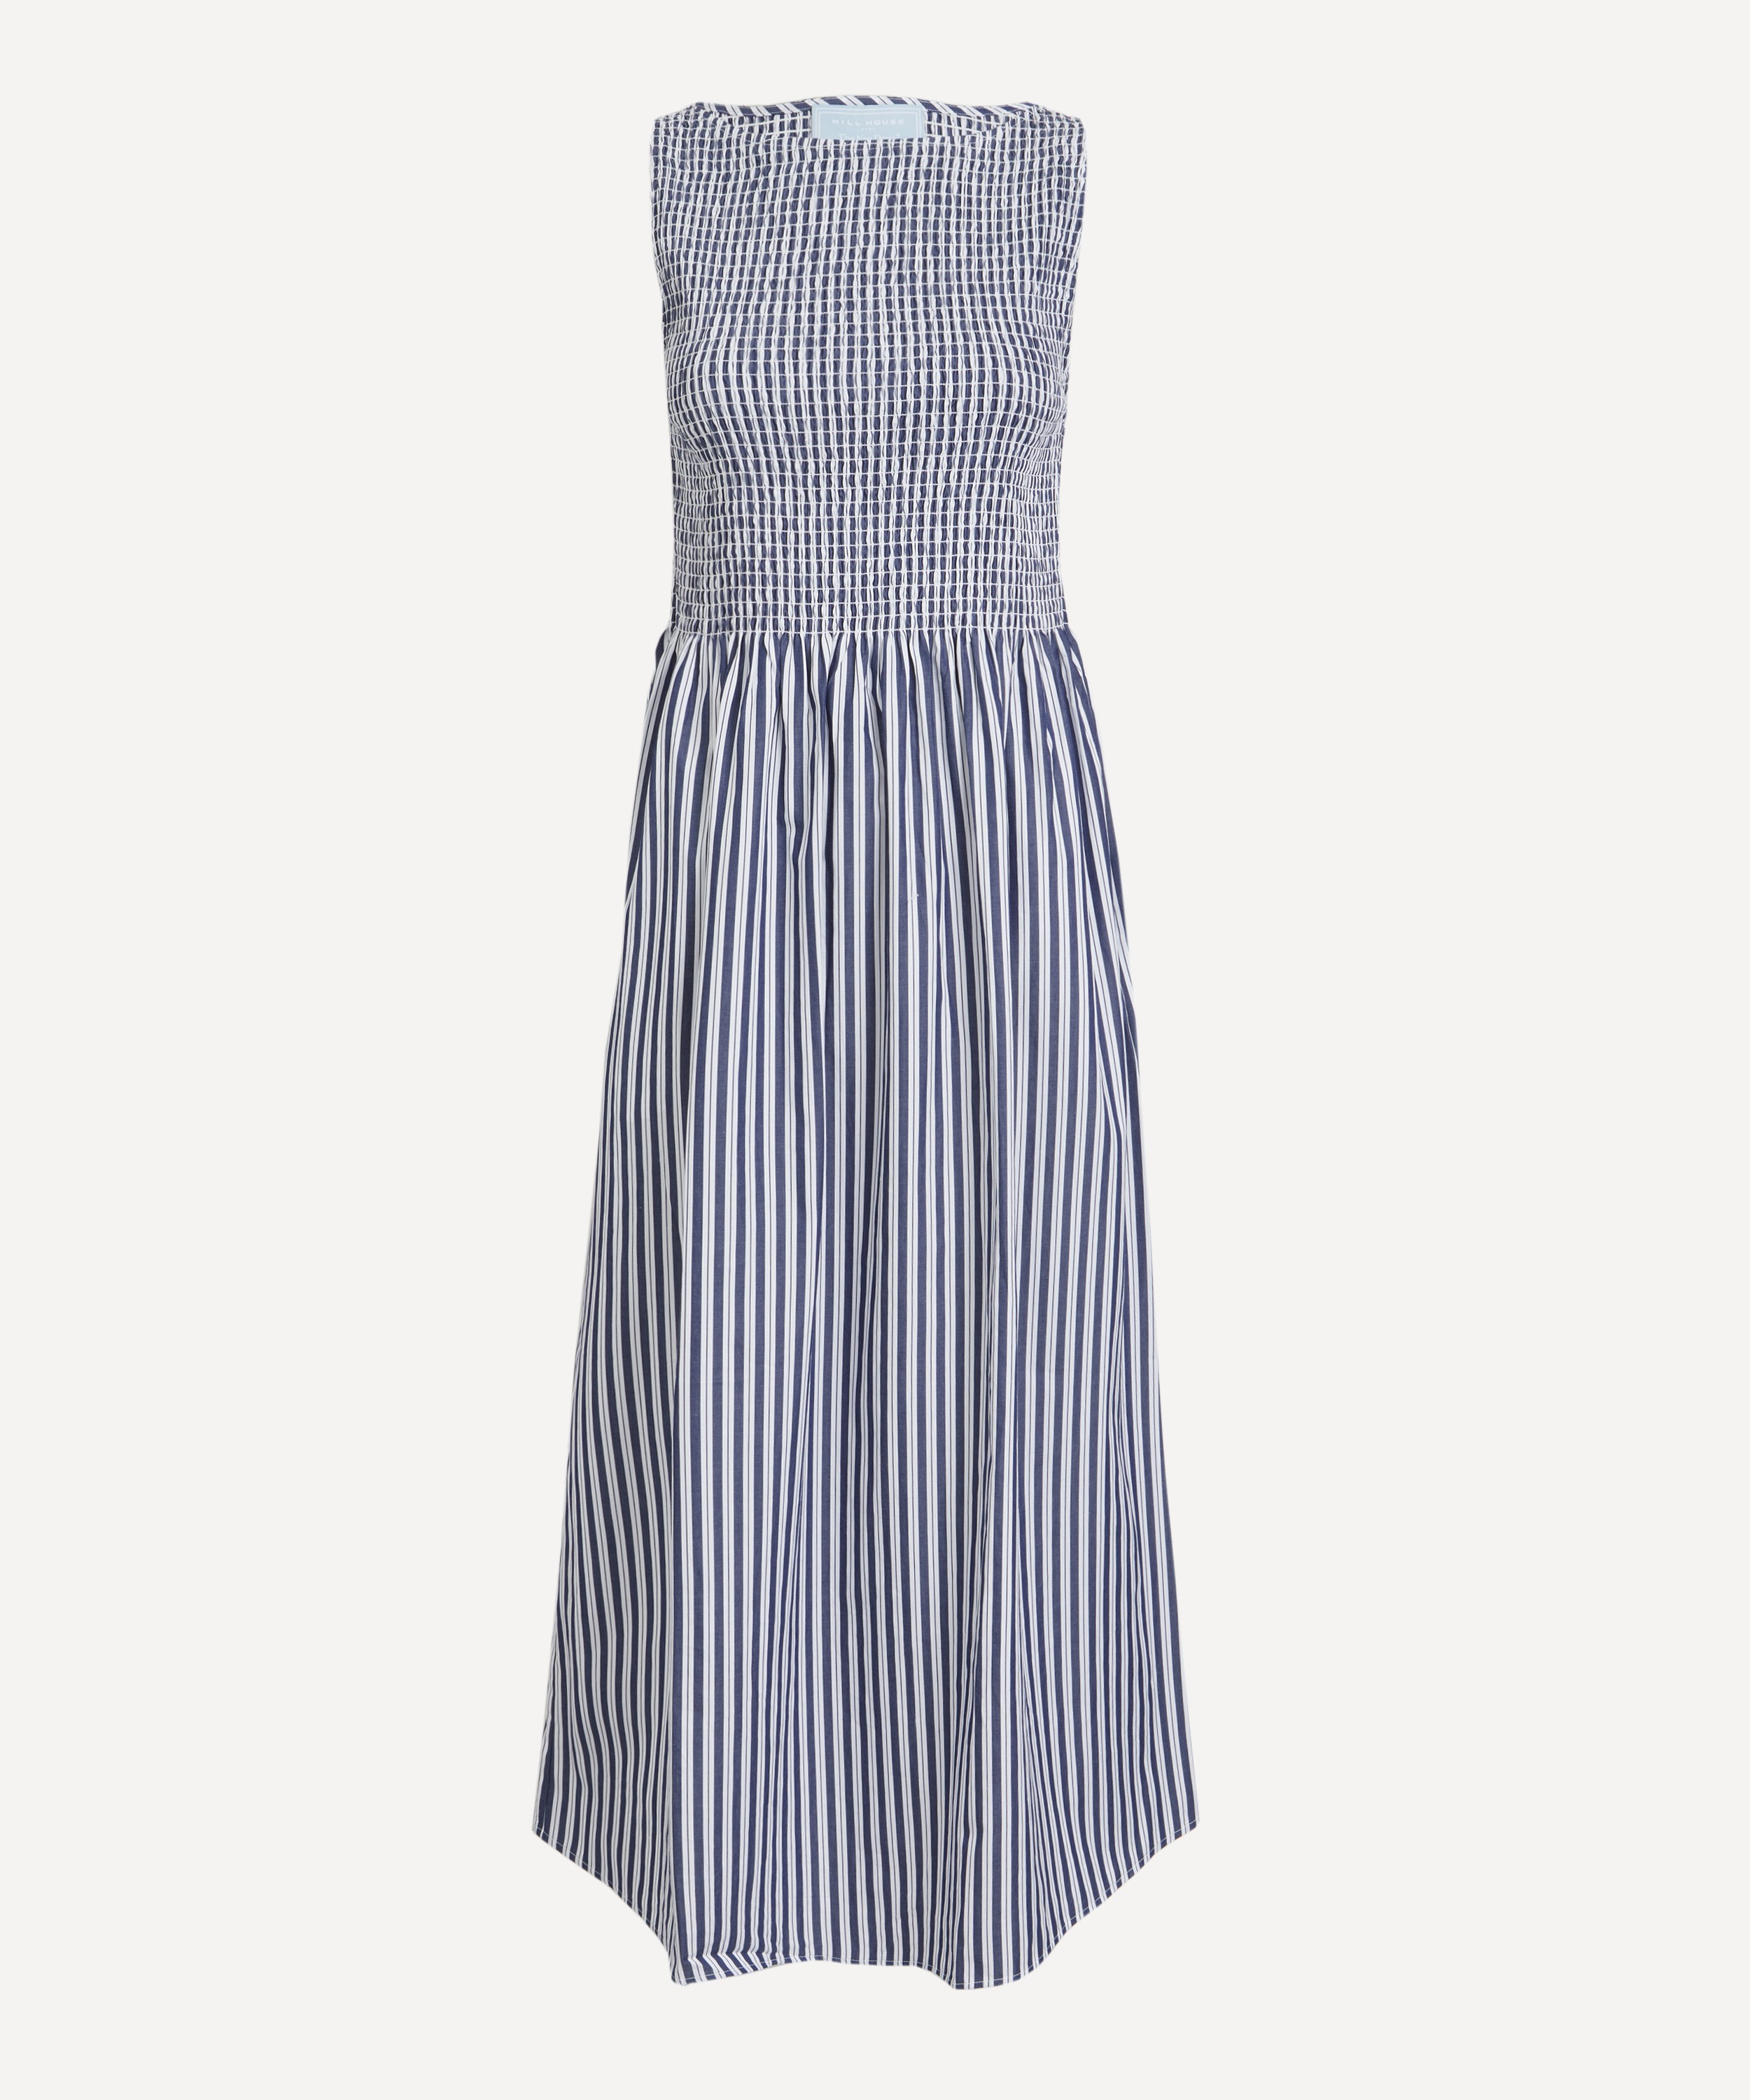 Hill House Home - Cosima Nap Dress in Navy Stripe